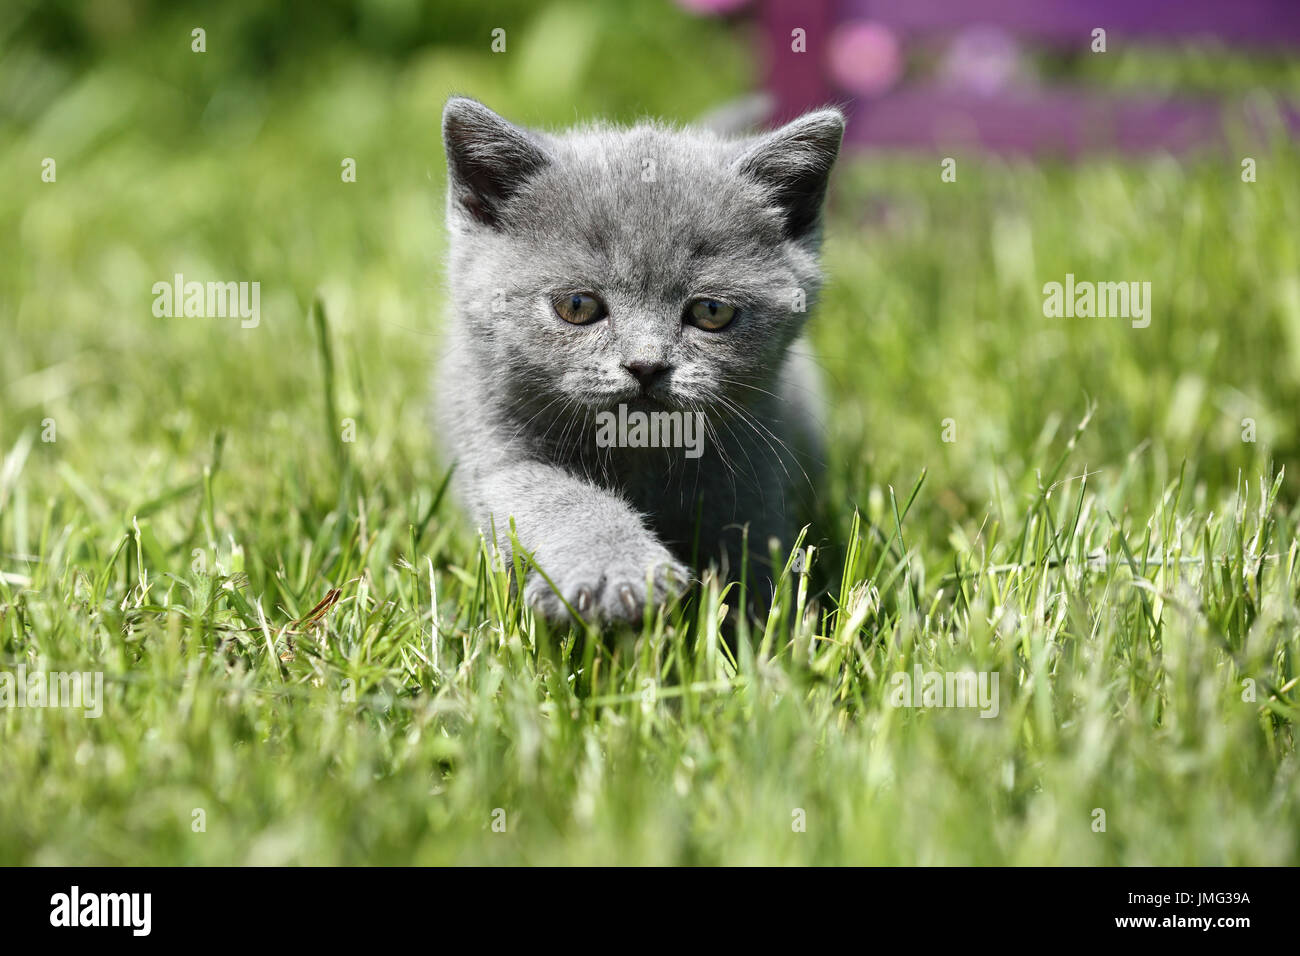 British Shorthair. Gray kitten (6 weeks old) walking on a lawn. Germany Stock Photo